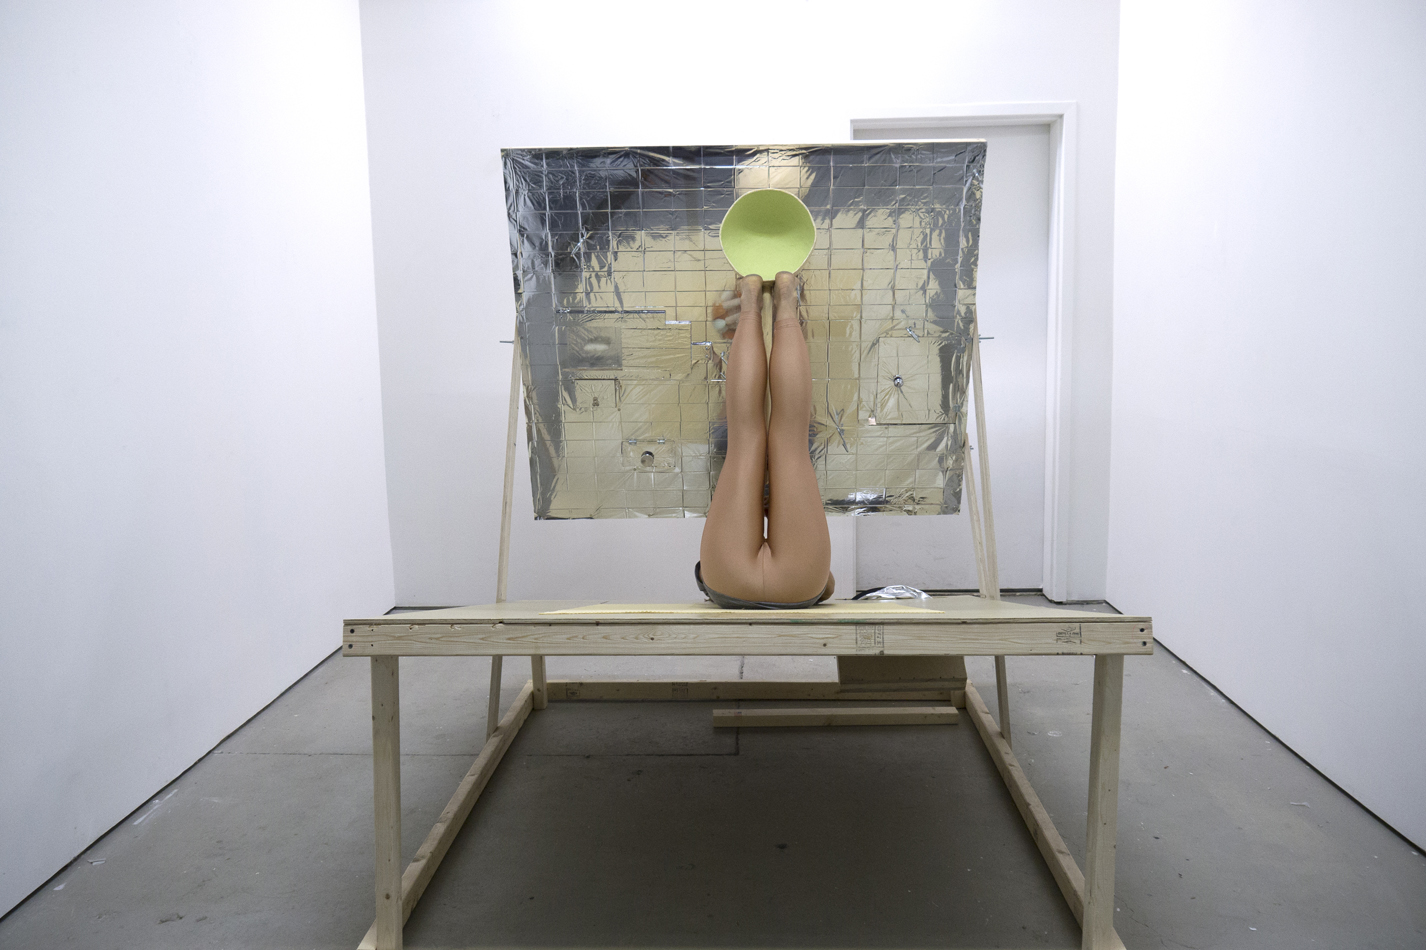 15_Vegetable_Be_Soap_2014_performance_at_Essex_Flowers_Gallery_New_York_NY